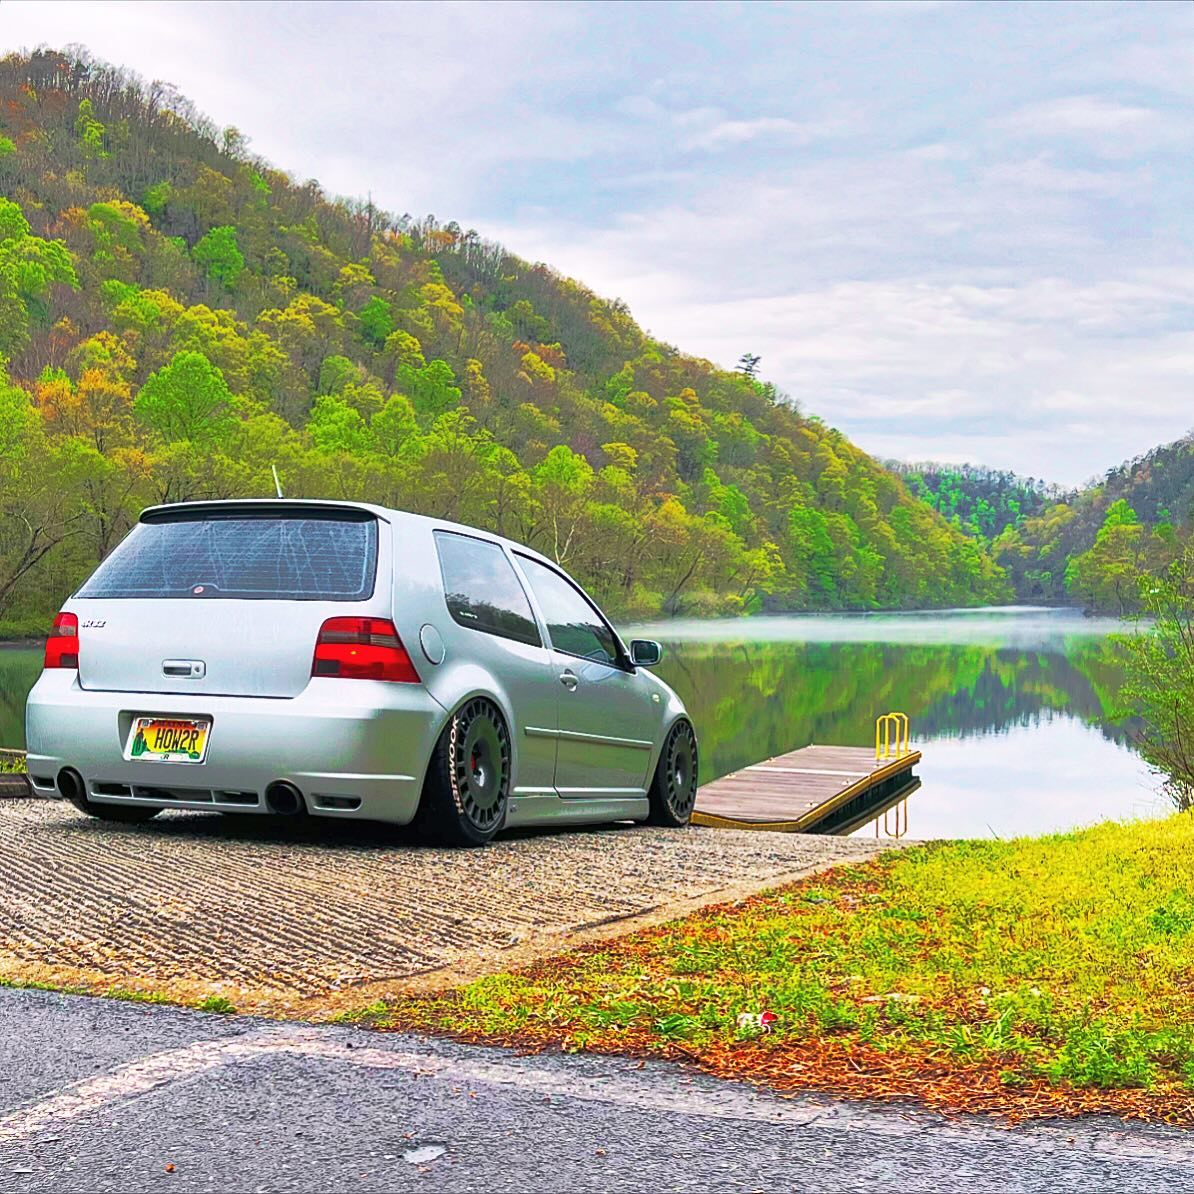 @marcosuarco is giving us all the lake trip vibes today.
---
TireStickers.com
#TireStickers #carmods #carsticker #carstickers #tirelettering #tireletters #tiresticker #tyrelettering #customtires #tiredecals #tiredecal #carculture #customcar